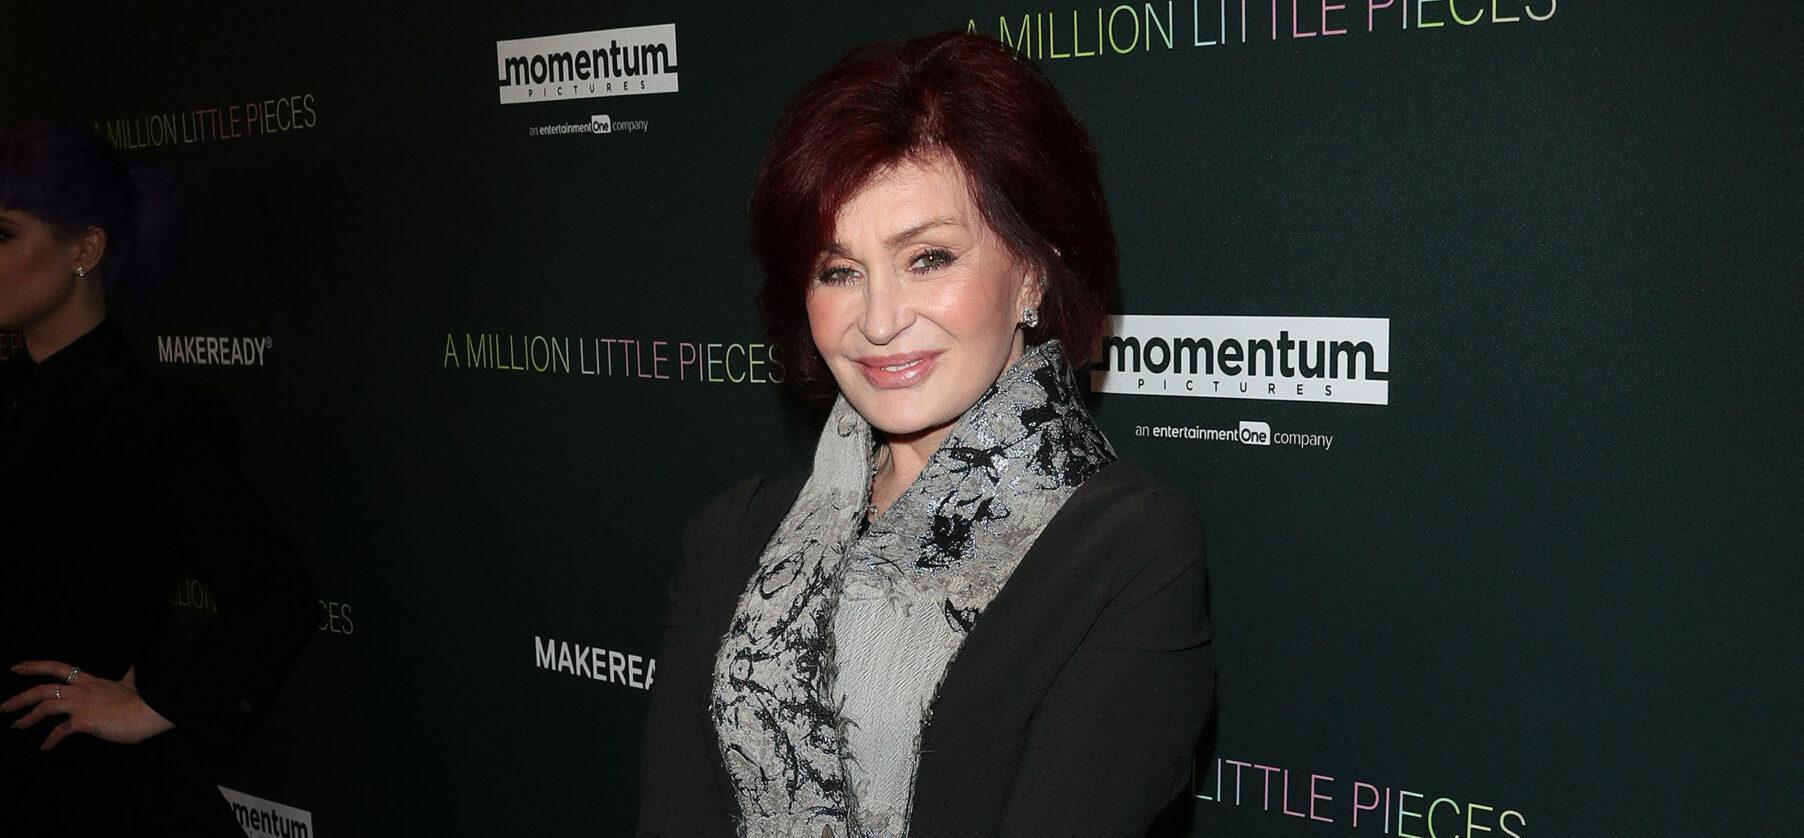 Sharon Osbourne’s Son Jokes About Her Plastic Surgery Habit: ‘Every 5,000 Miles, Mom Goes In For A Tune-Up’